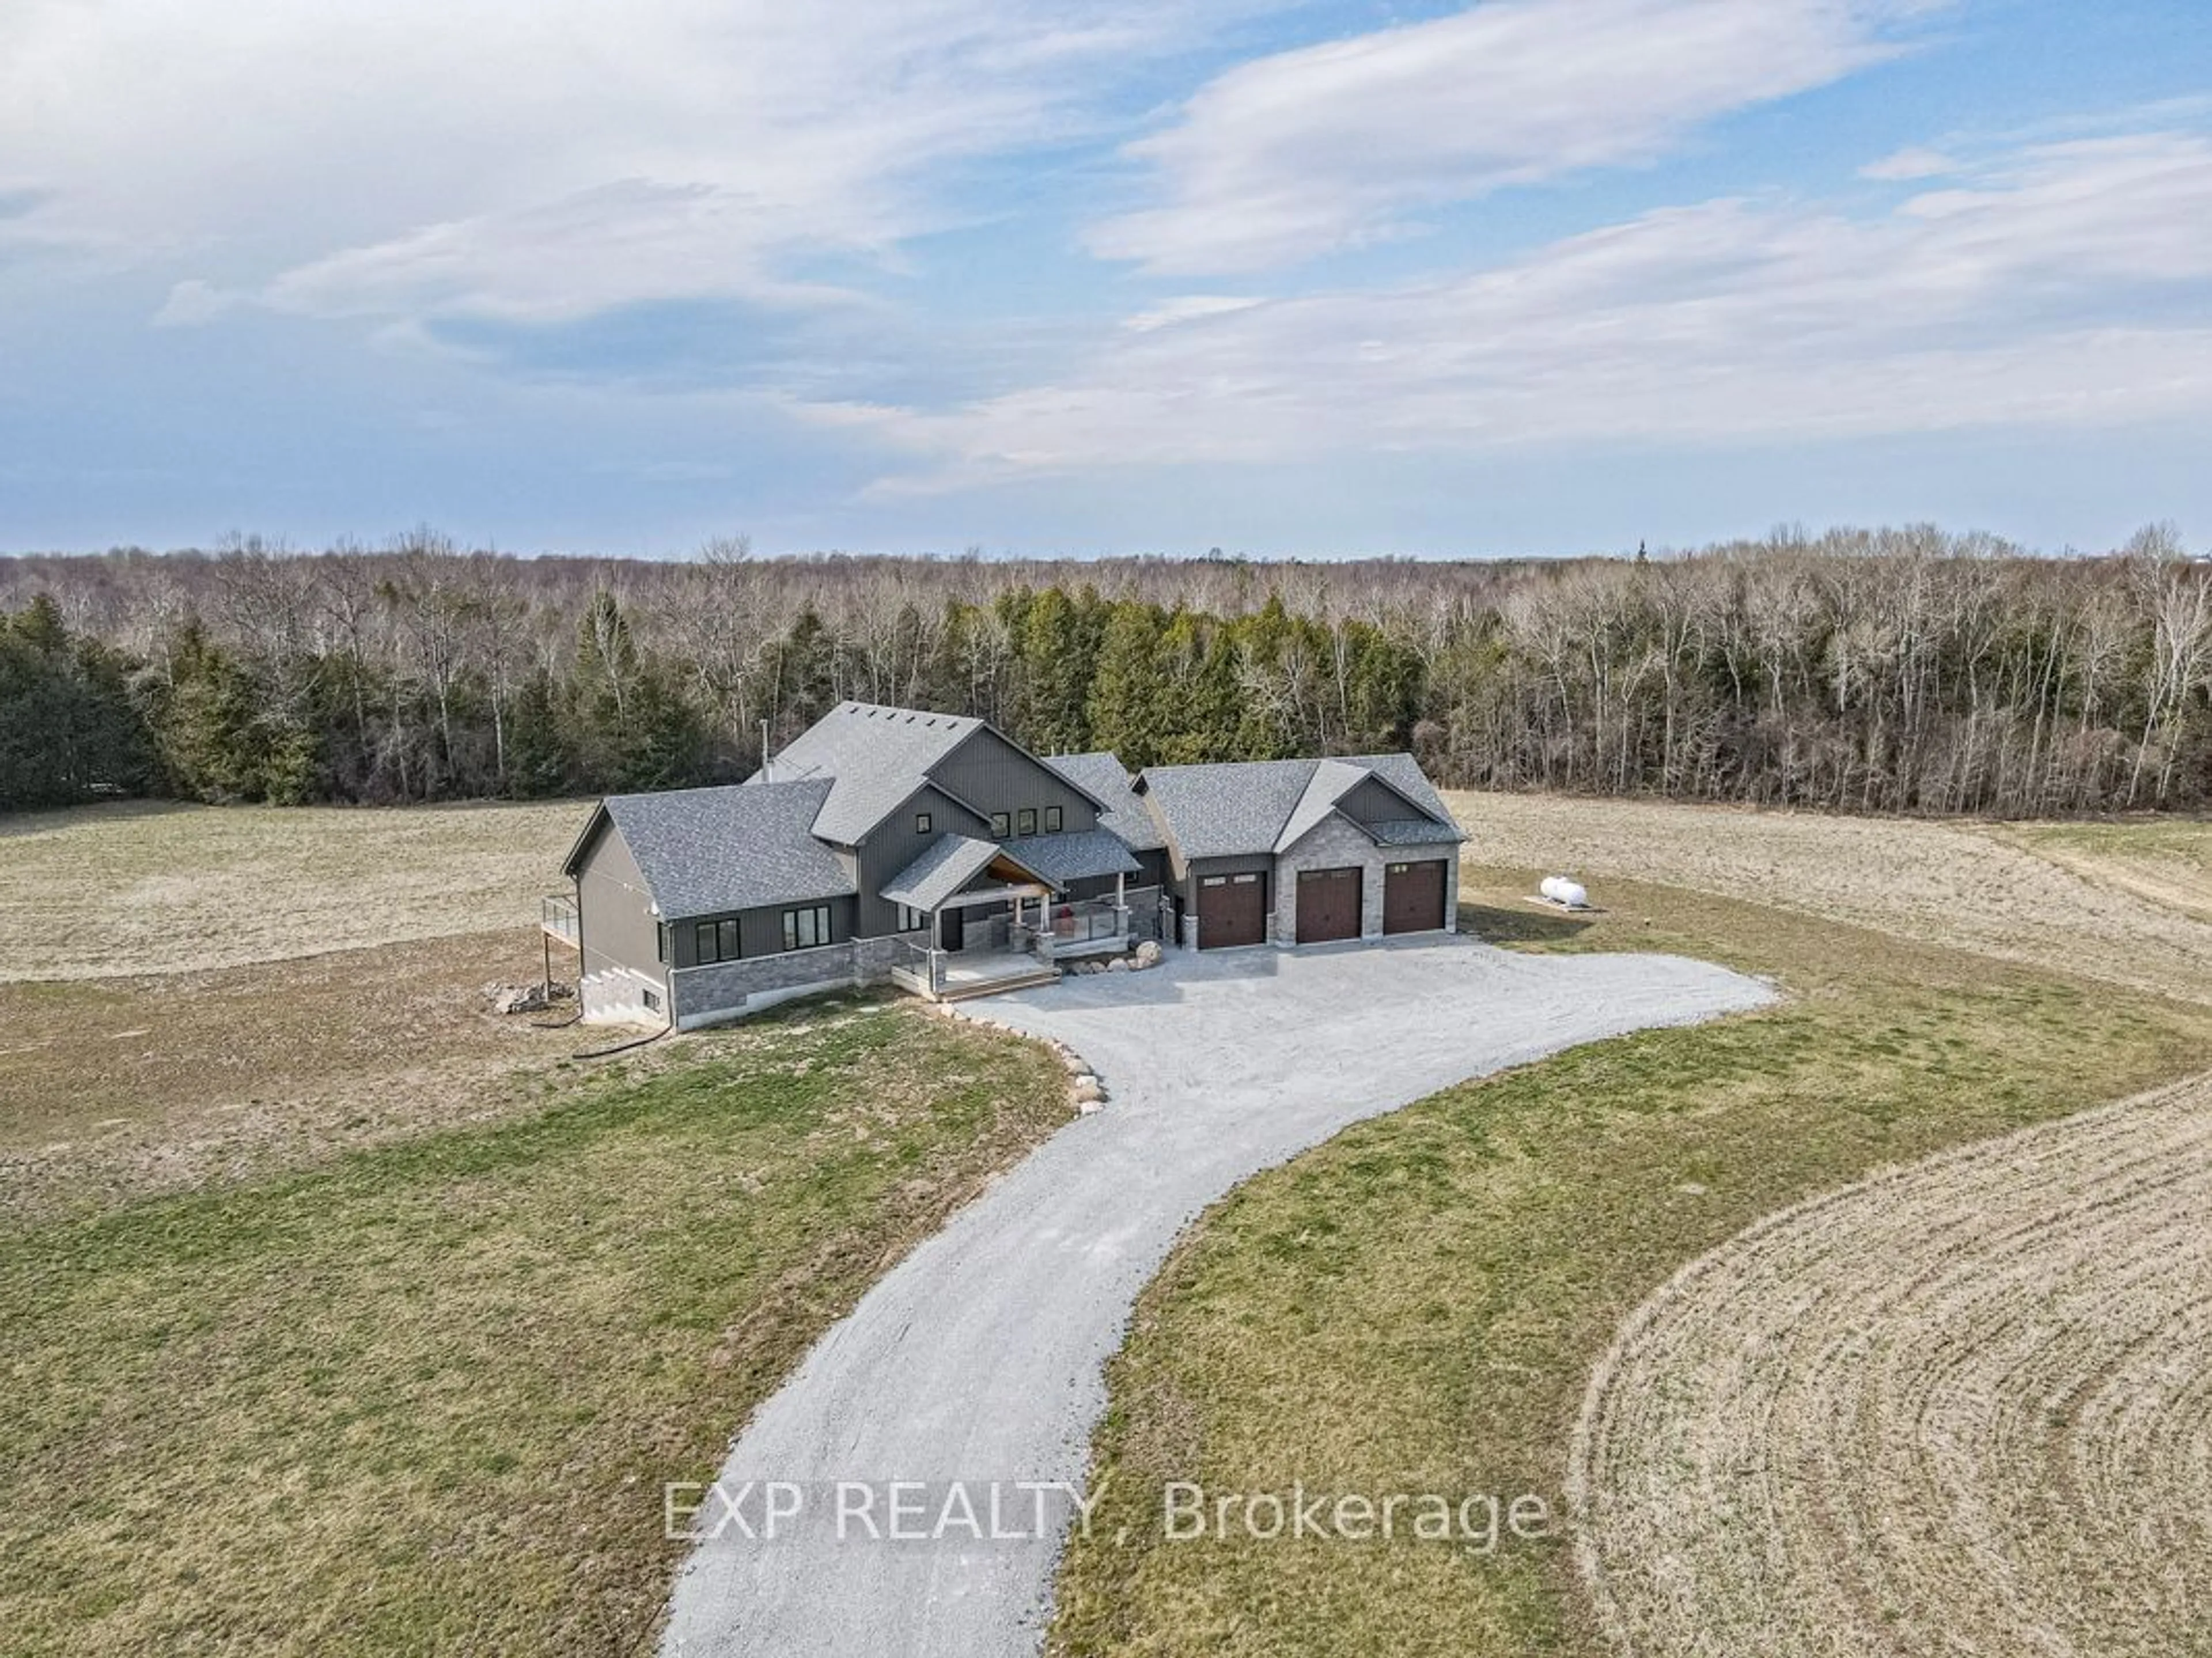 Frontside or backside of a home for 1023 Concession Road 8 Rd, Brock Ontario L0C 1H0